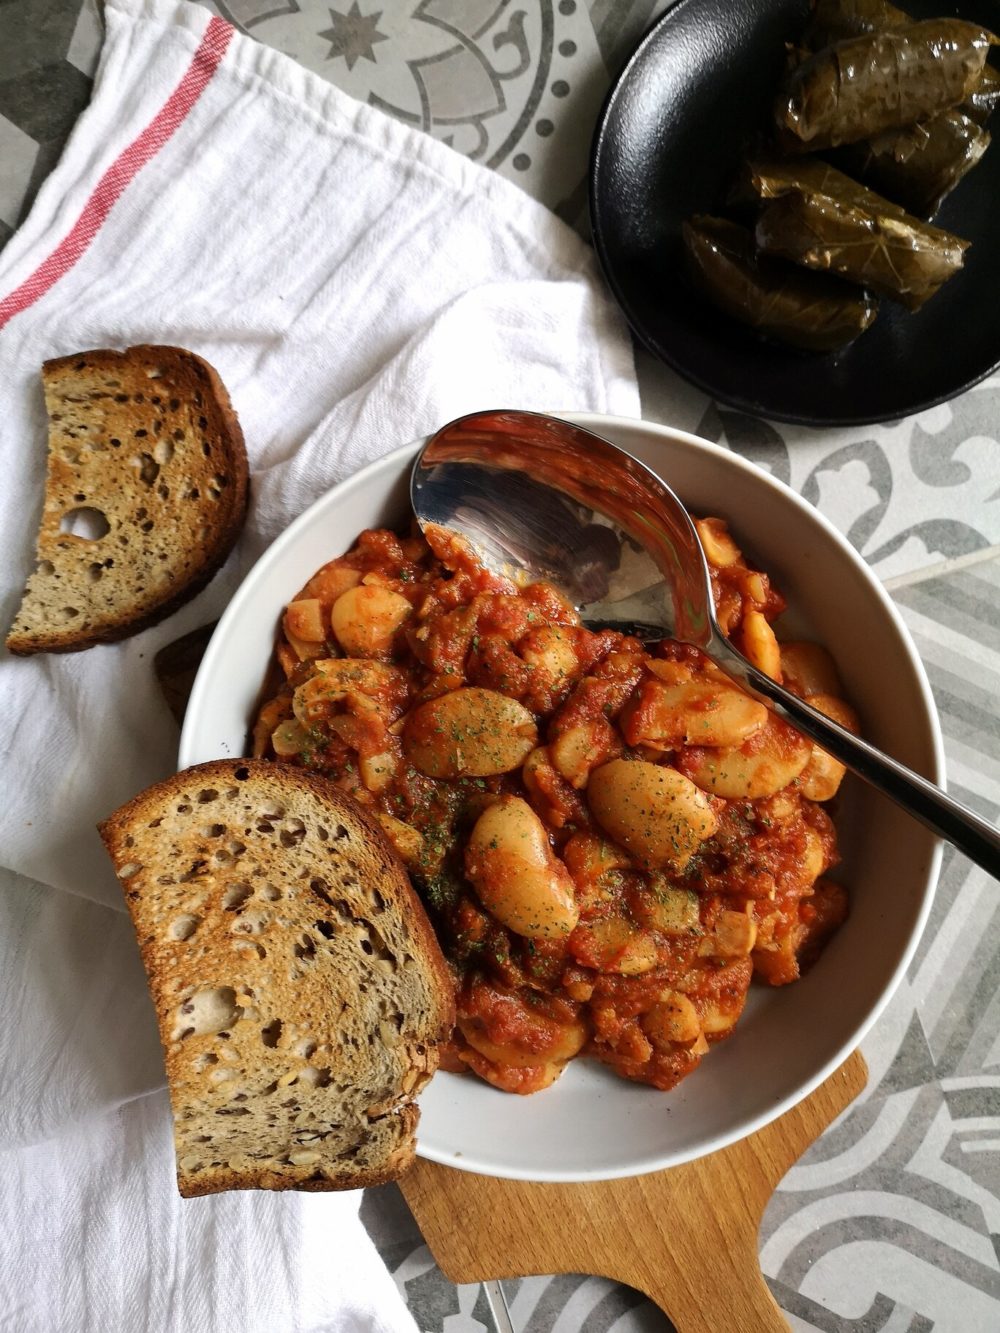 gigantes beans in a white bowl with bread and a silver spoon